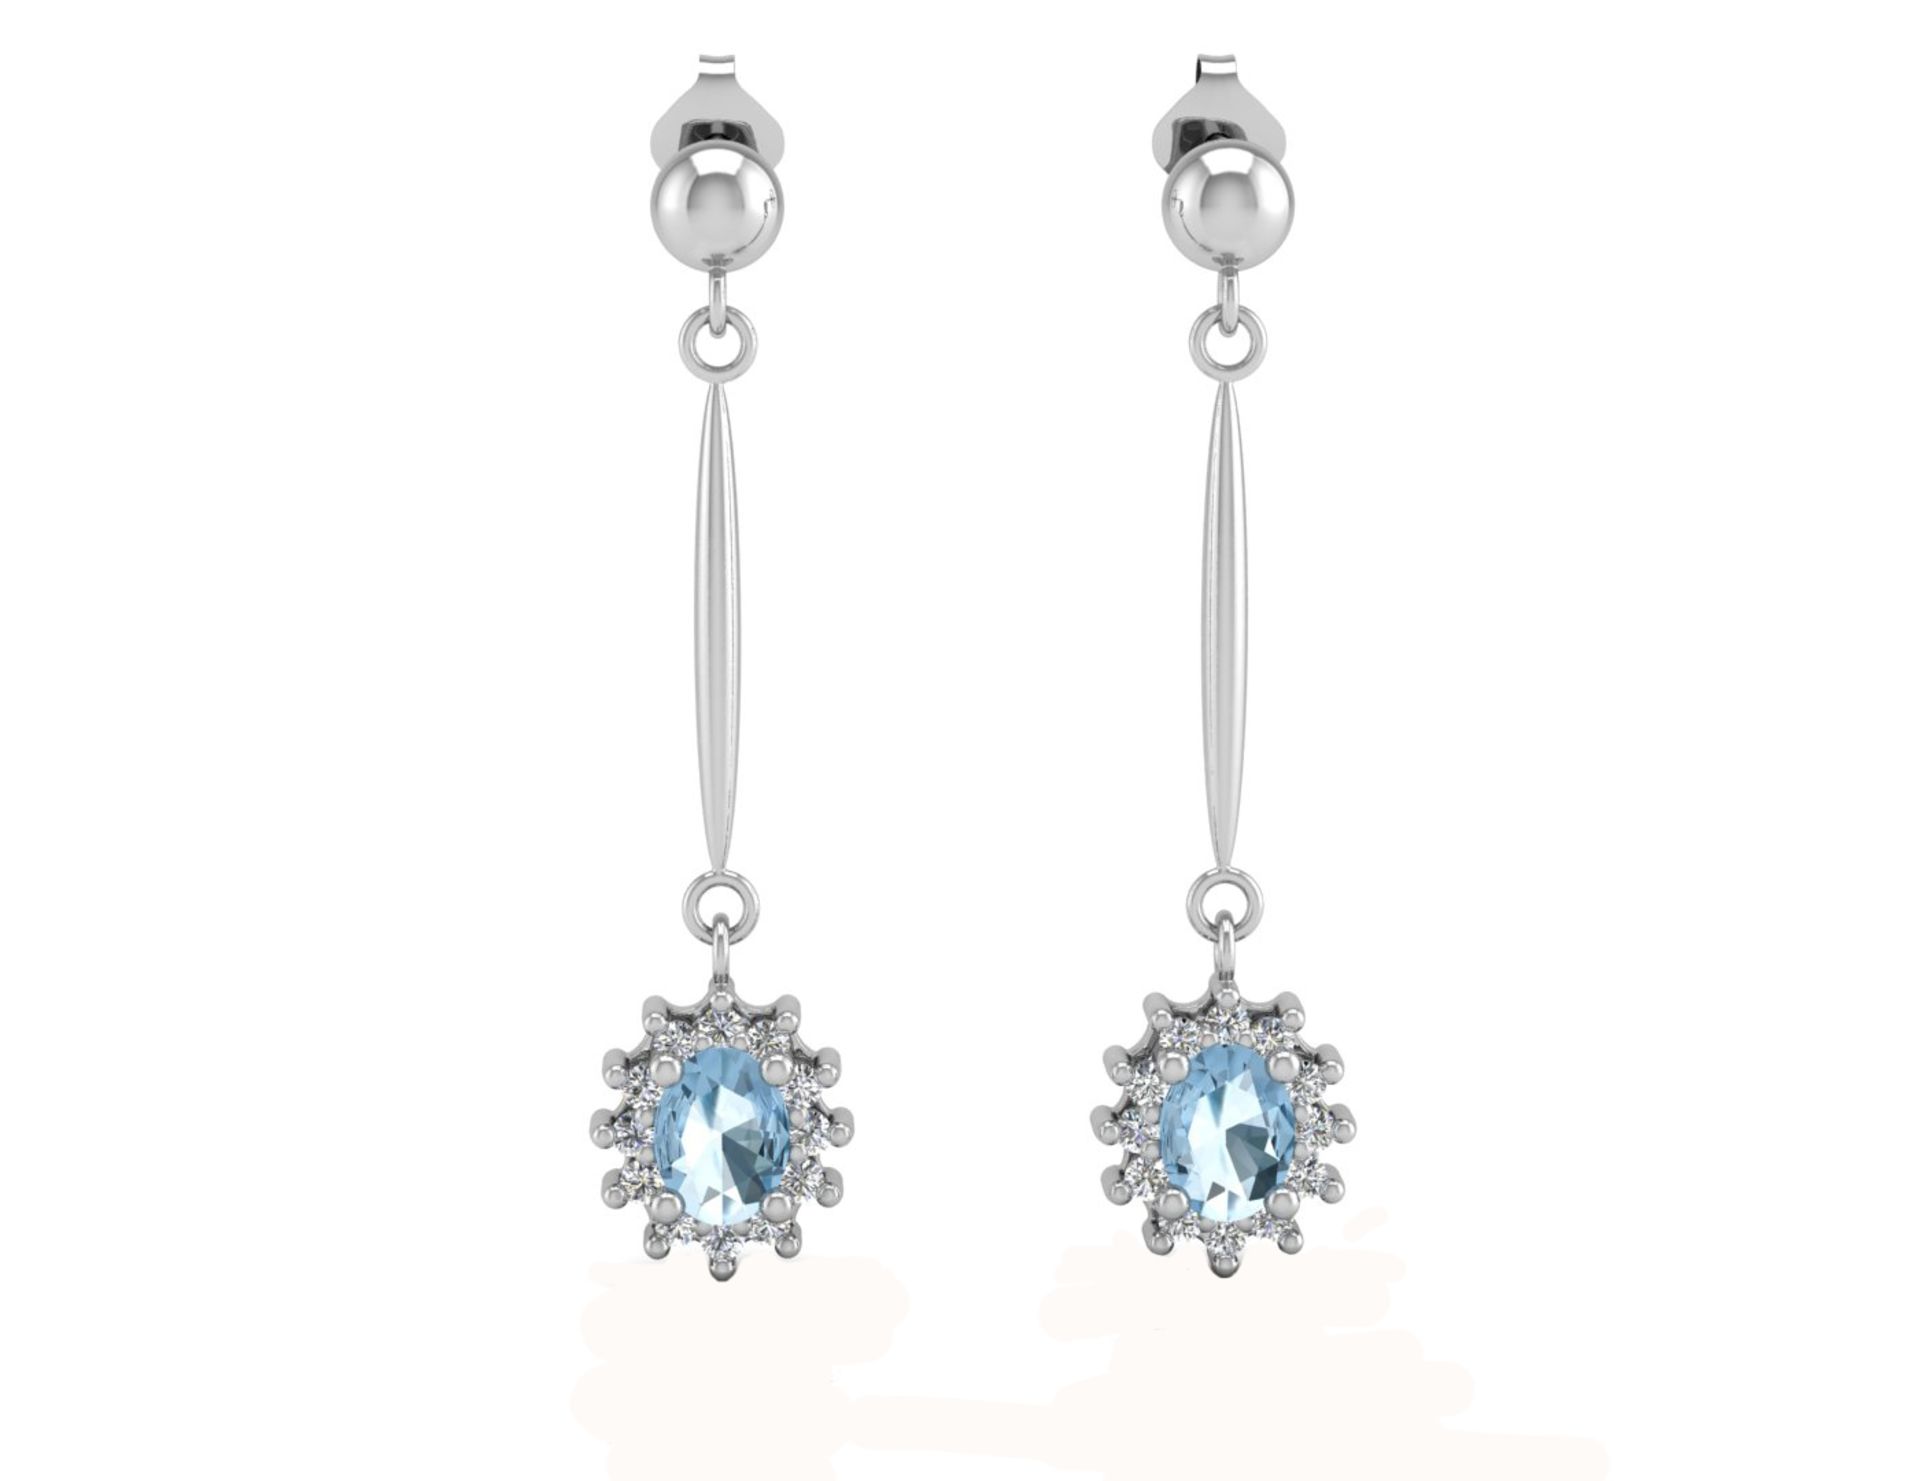 9ct White Gold Diamond And Blue Topaz Earring 0.12 Carats - Valued by GIE £1,000.00 - 9ct White Gold - Image 3 of 4